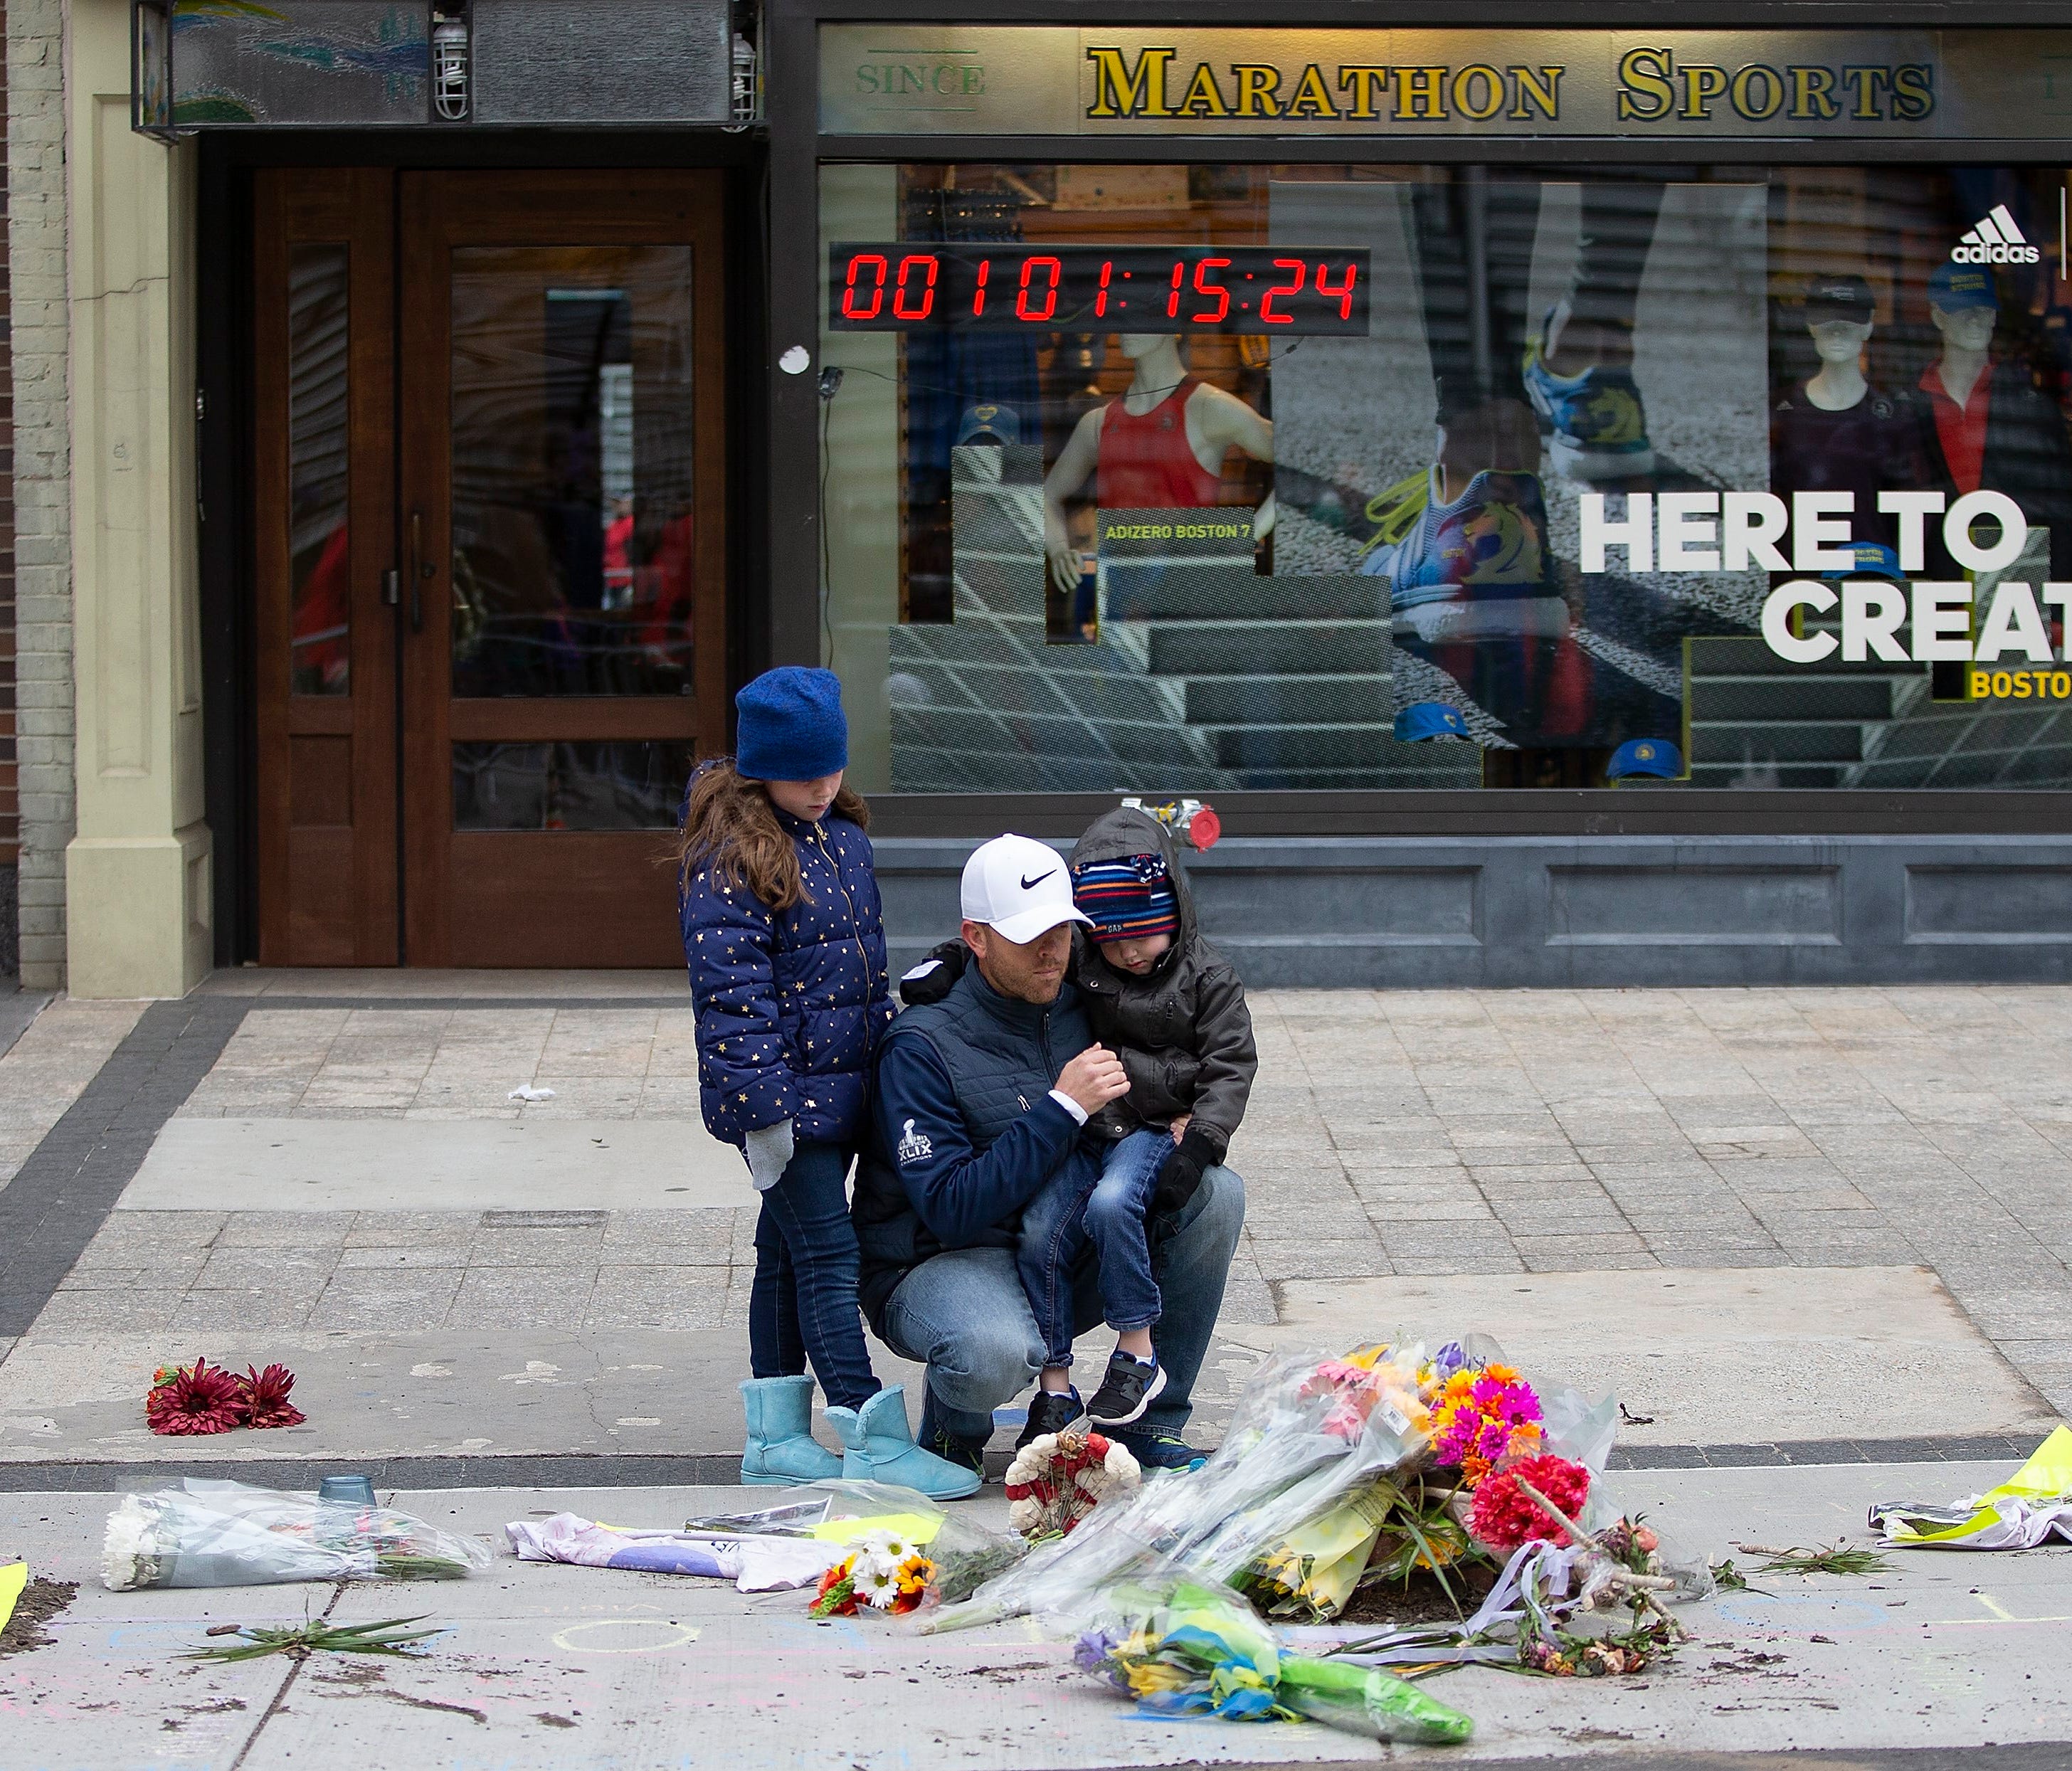 People pause at a memorial on the ground outside of at Marathon Sports at 671 Boylston St., the location of the first explosion, following a memorial ceremony on the fifth anniversary of the Boston Marathon Bombing, n Boston, Mass. on April 15, 2018.